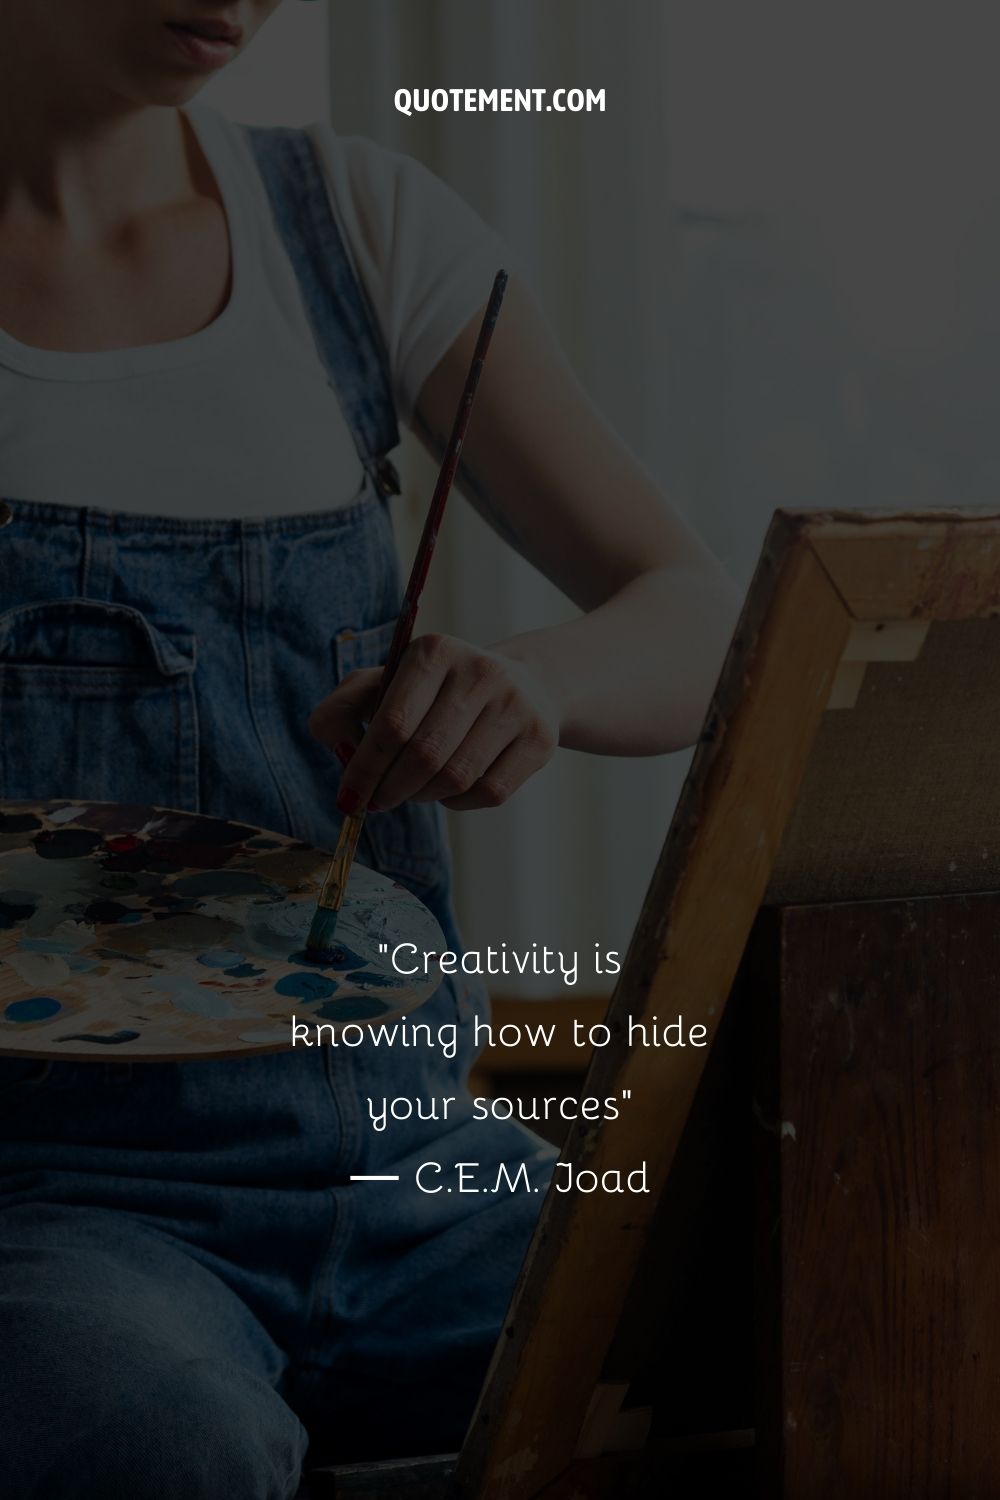 Creativity is knowing how to hide your sources